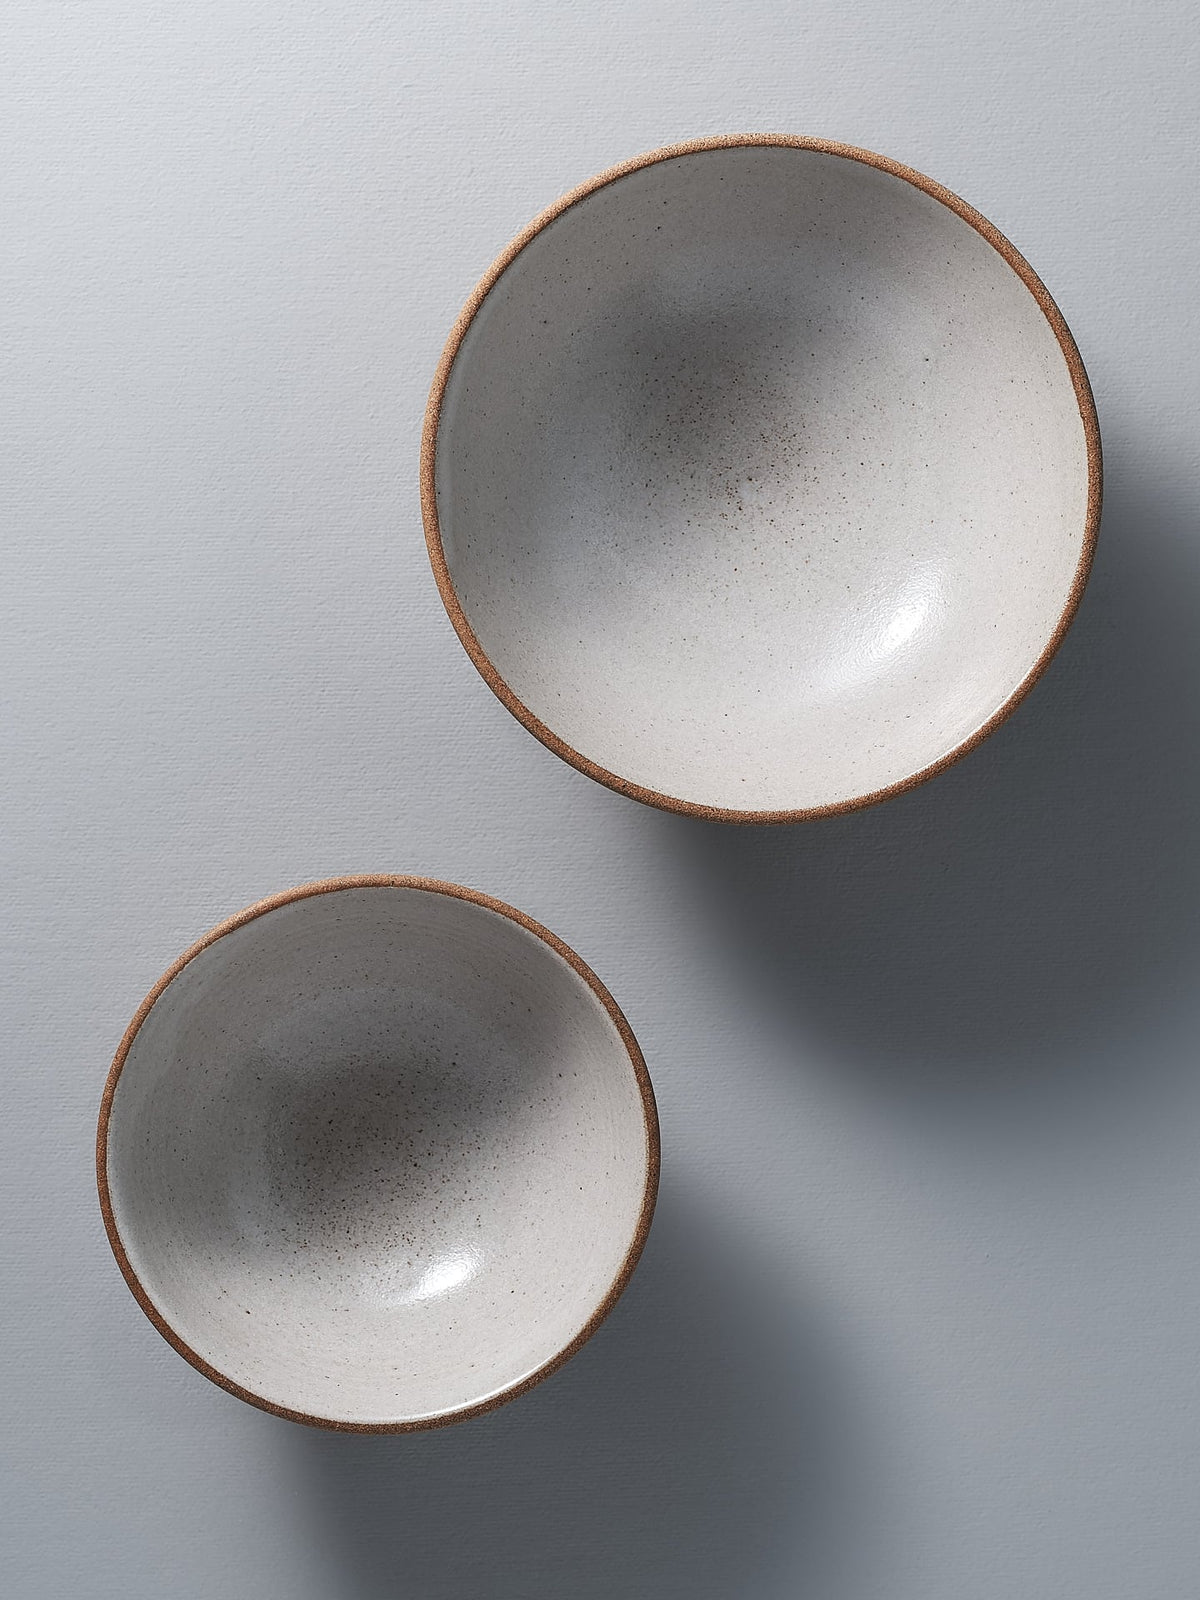 Two Nicola Shuttleworth Condiment Bowls – Small, white and brown, on a gray surface.